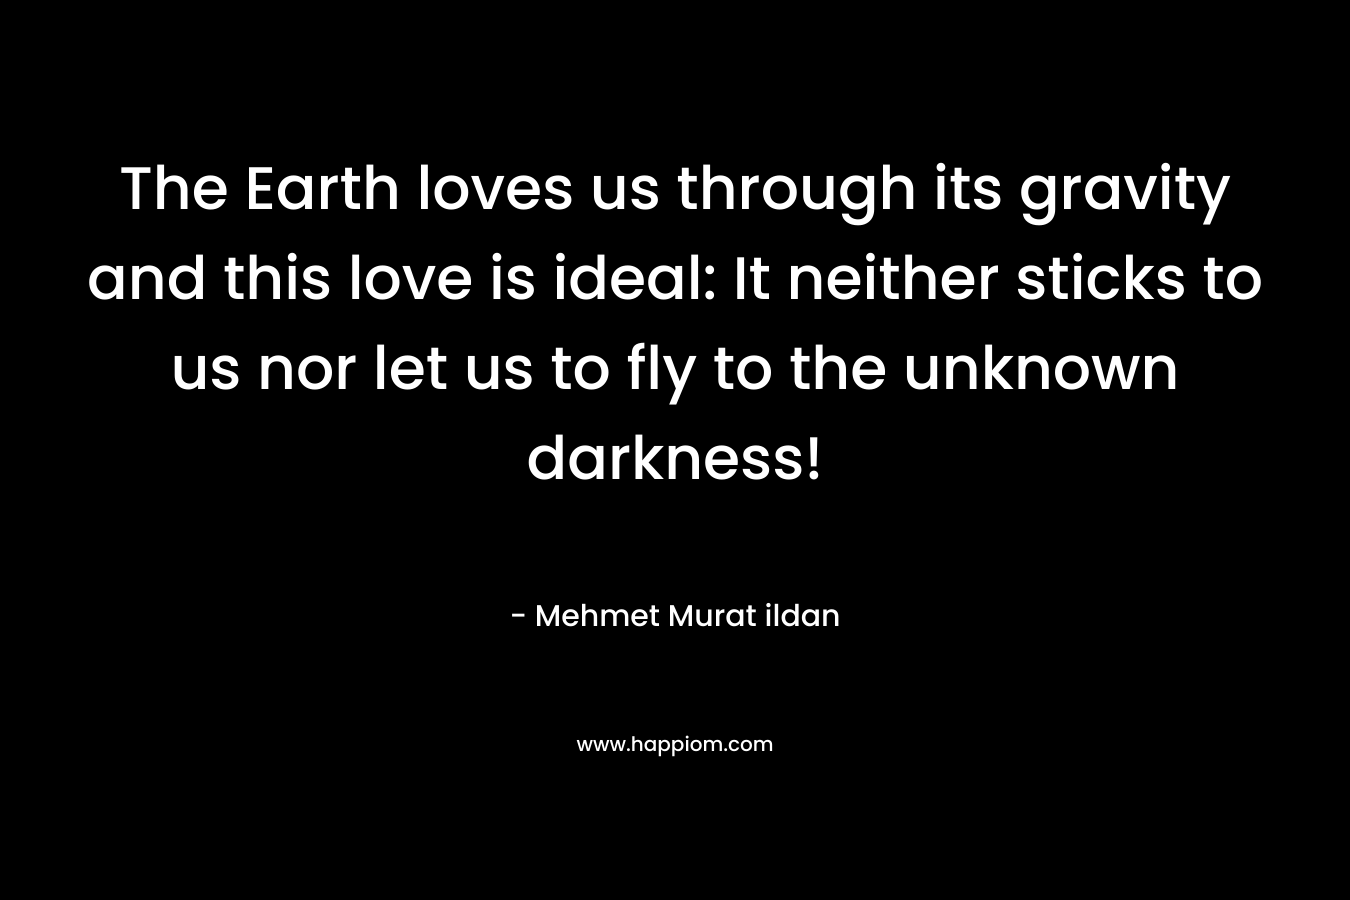 The Earth loves us through its gravity and this love is ideal: It neither sticks to us nor let us to fly to the unknown darkness! – Mehmet Murat ildan